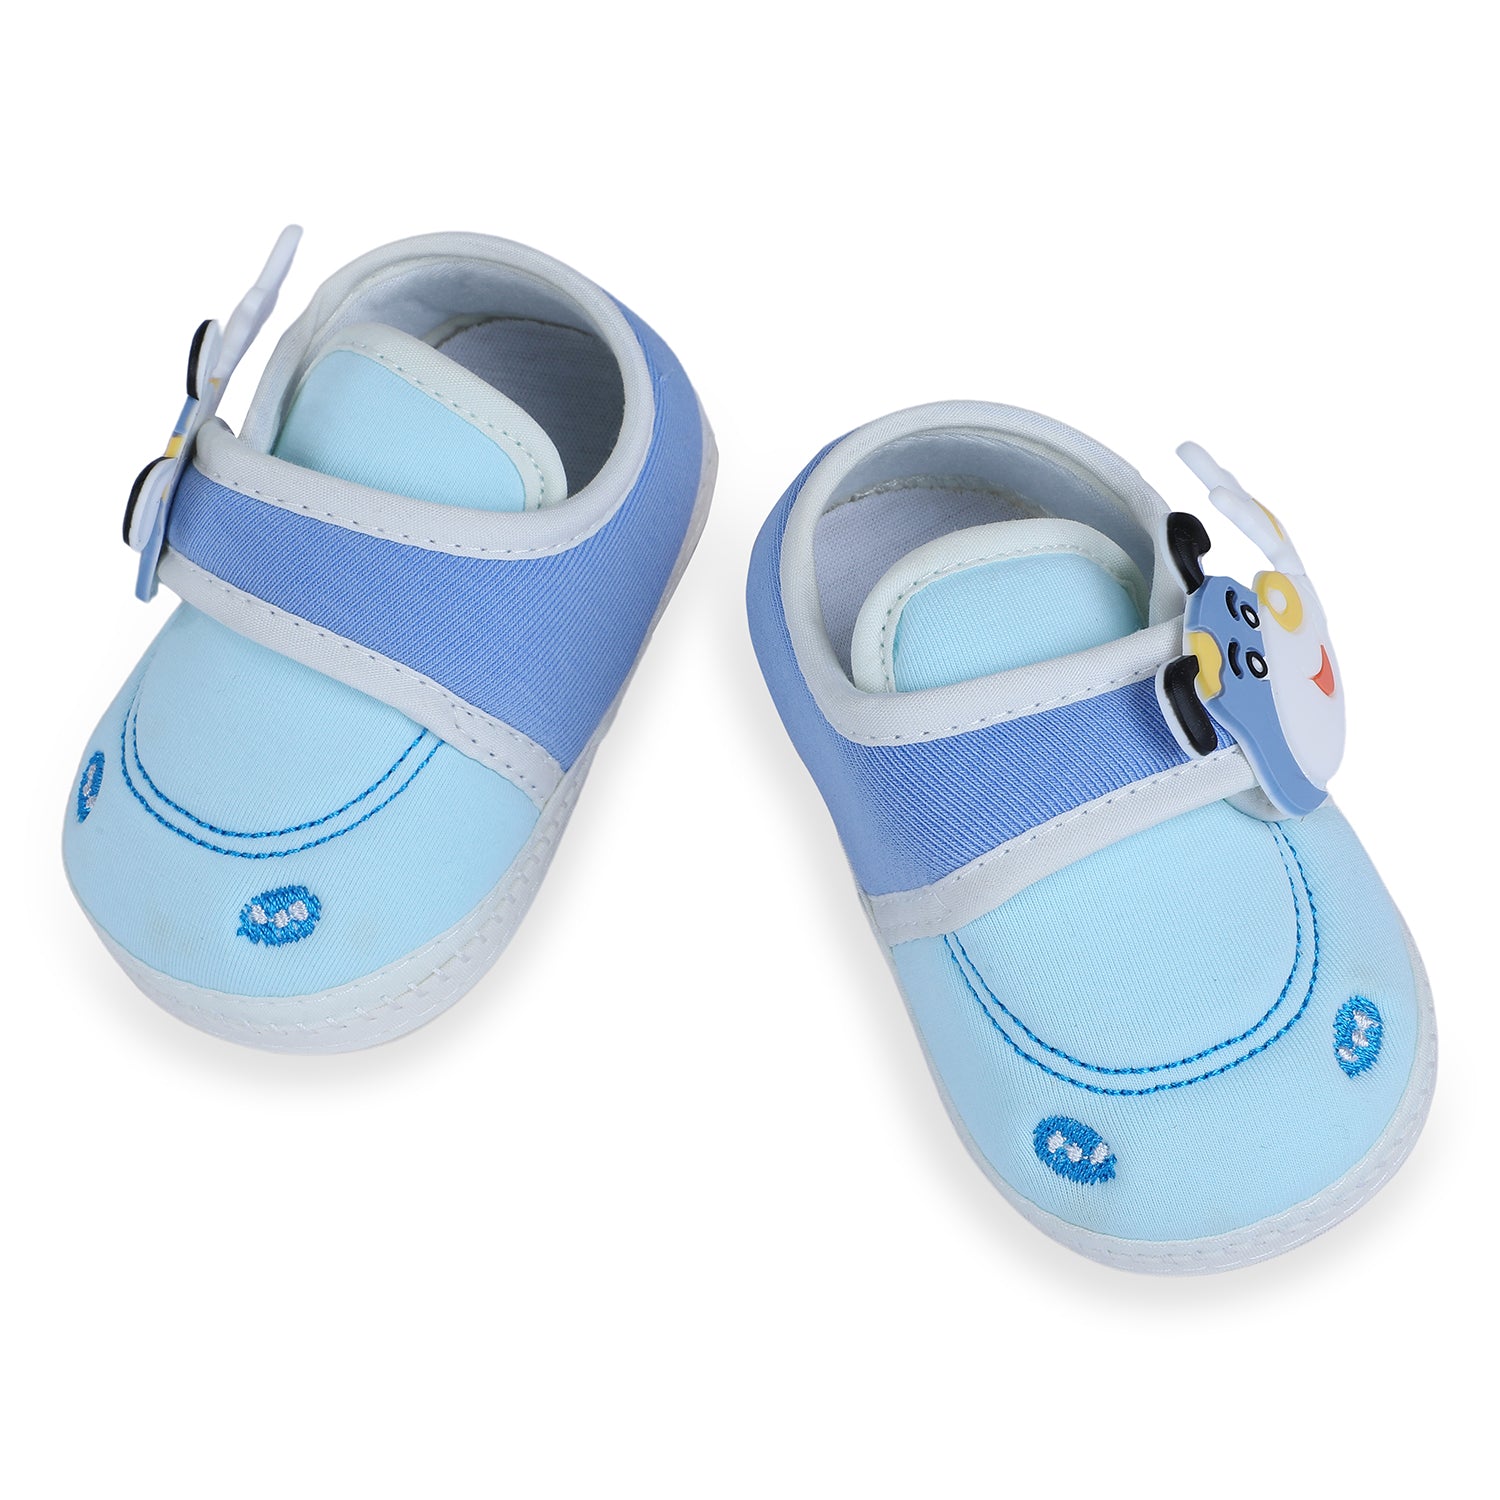 Baby Moo Puppy Face Soft Sole Anti-Slip Booties - Blue - Baby Moo